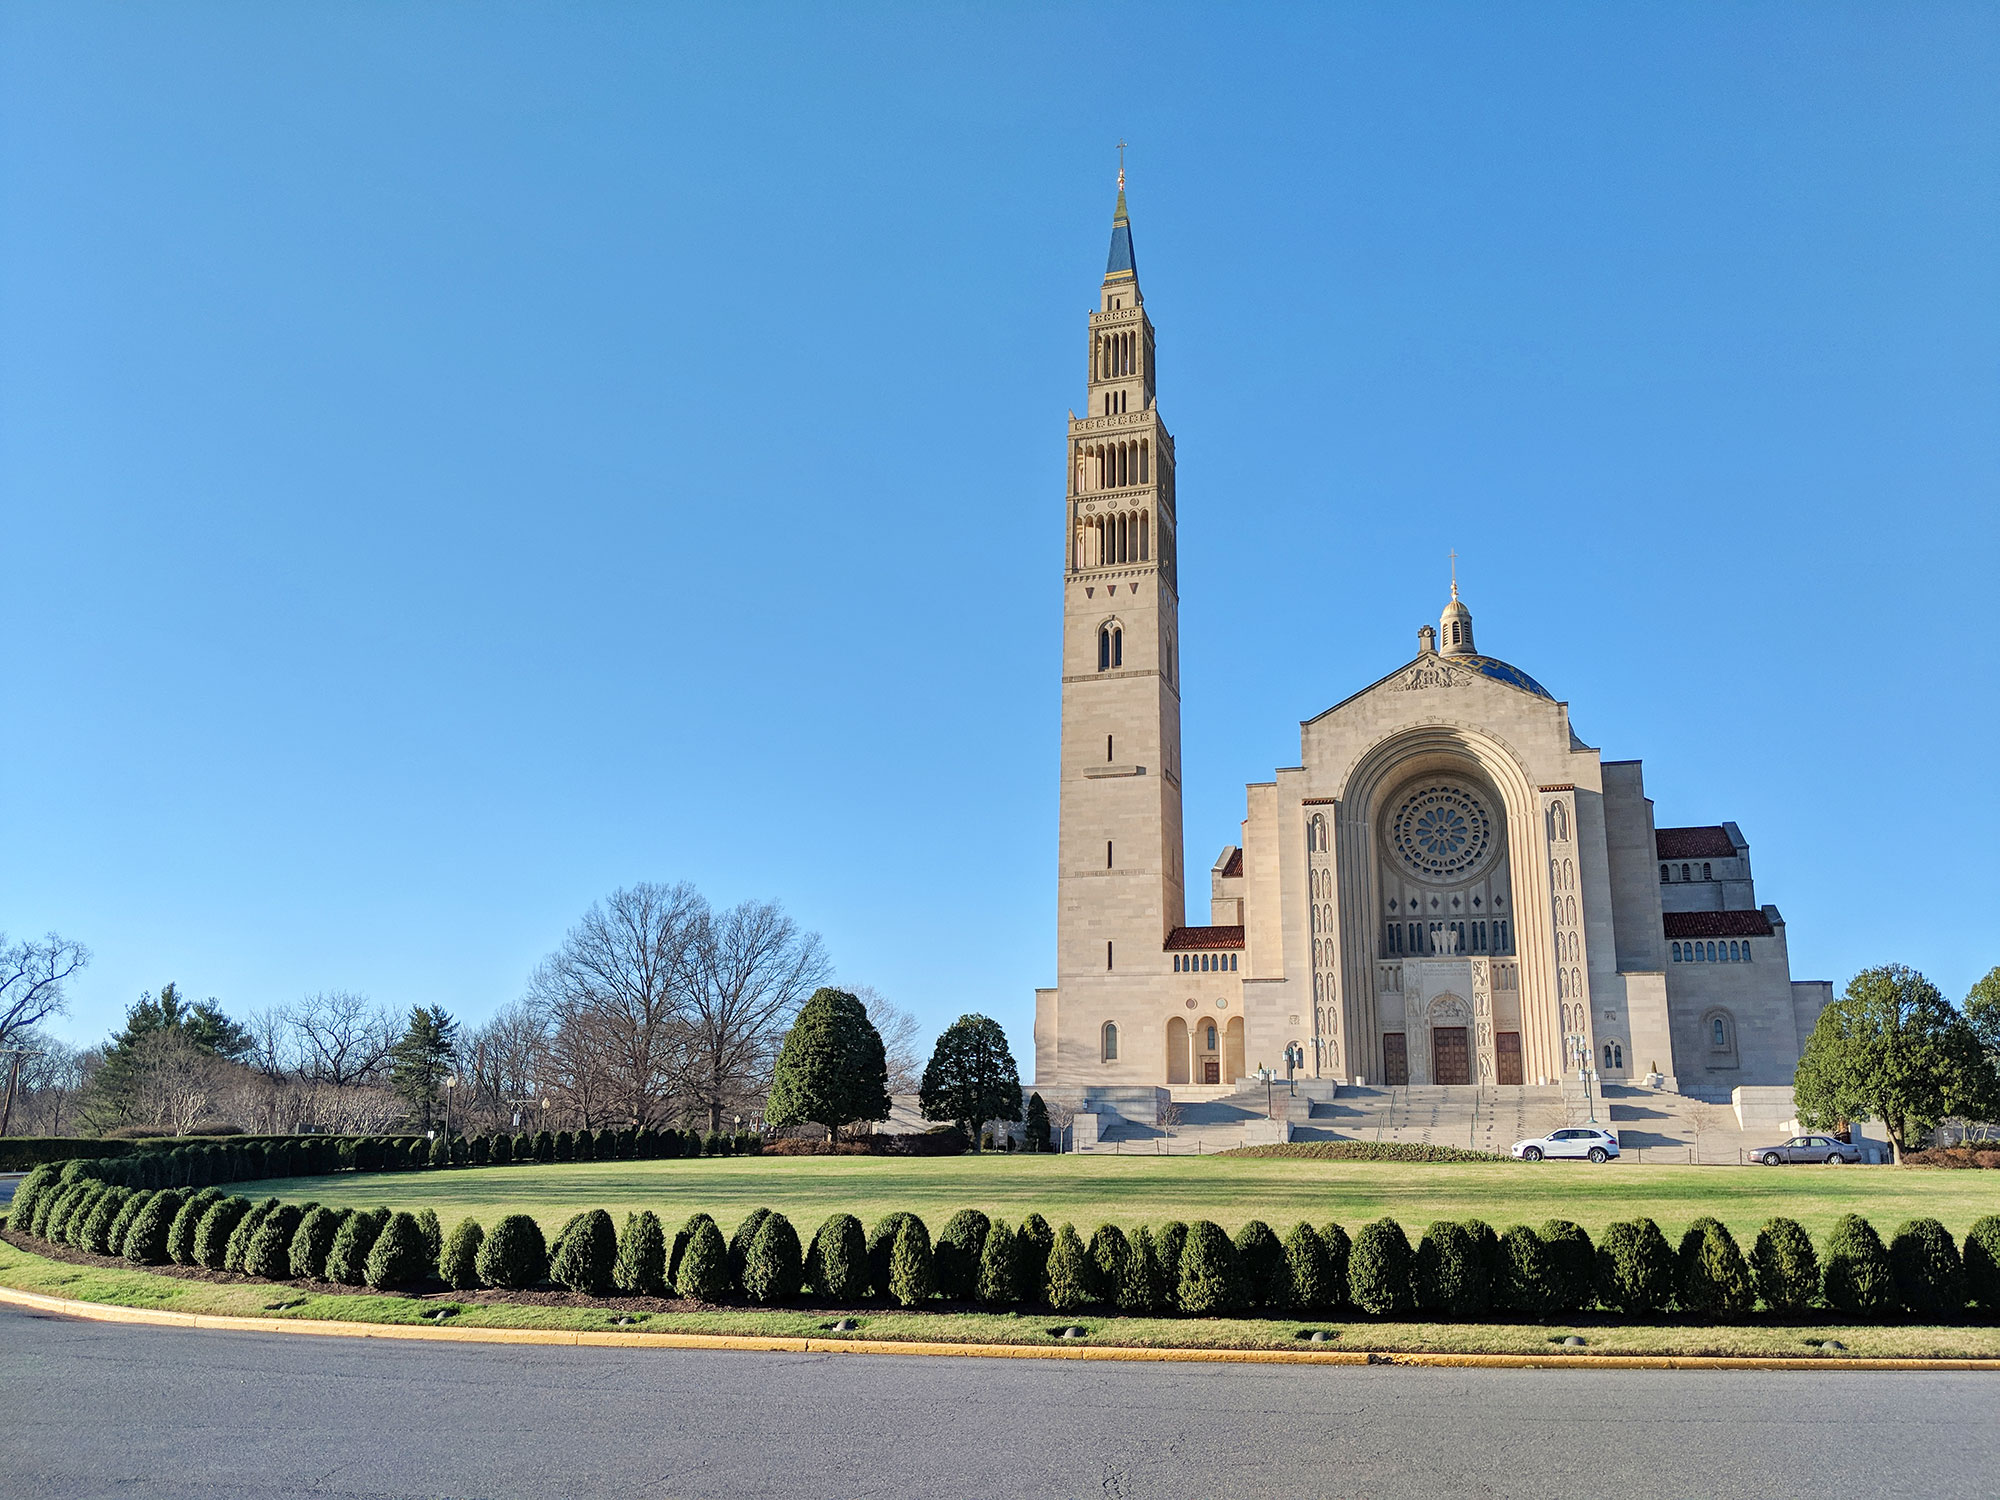 The exterior of the National Shrine of the Immaculate Conception in Washington D.C. 